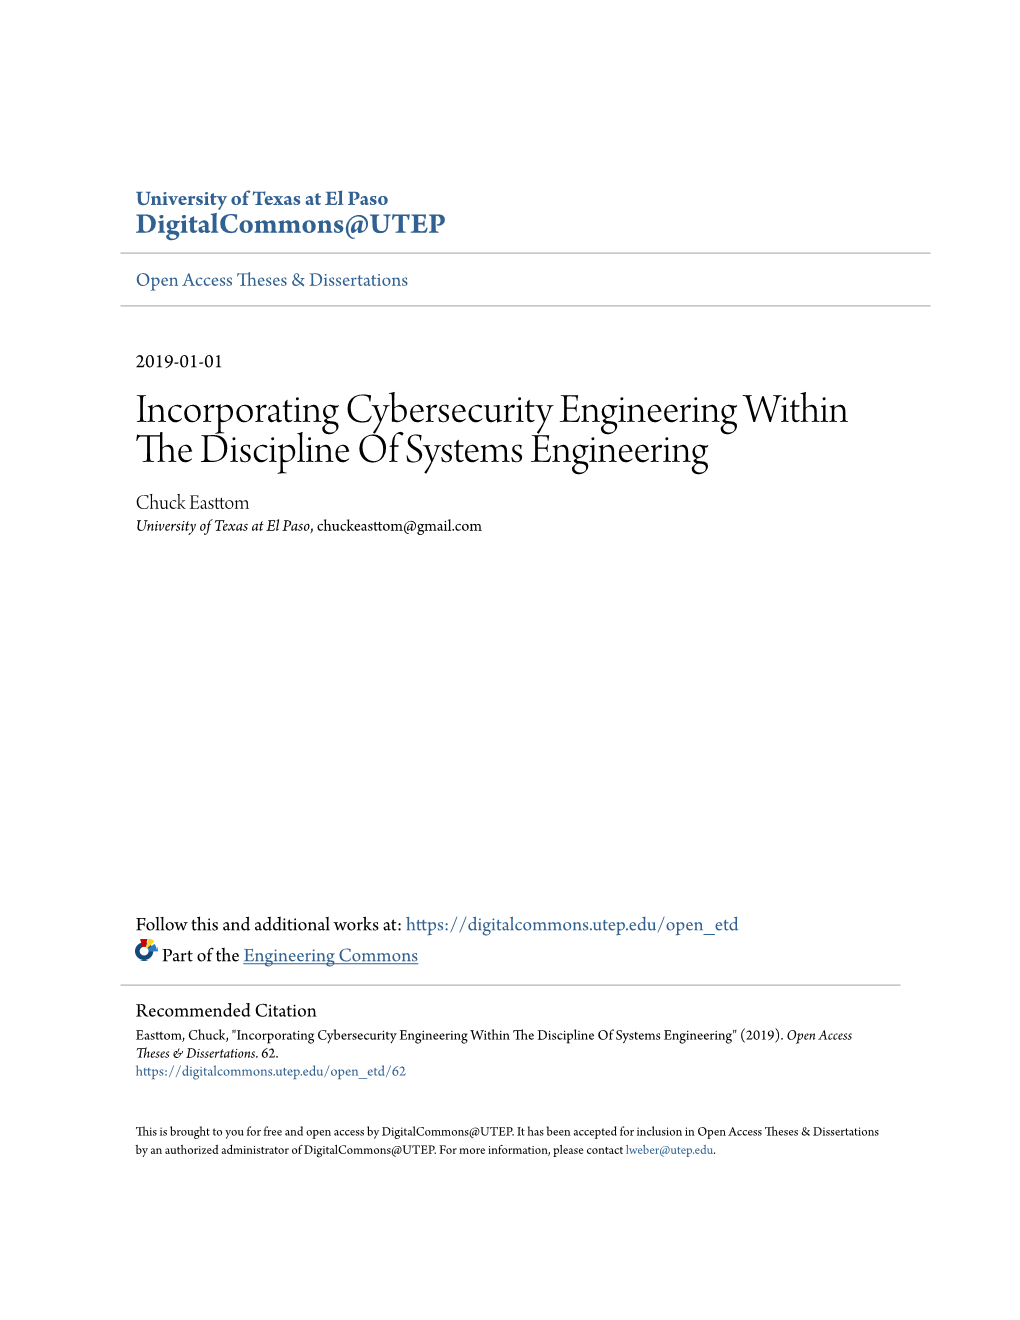 Incorporating Cybersecurity Engineering Within the Discipline of Systems Engineering Chuck Easttom University of Texas at El Paso, Chuckeasttom@Gmail.Com